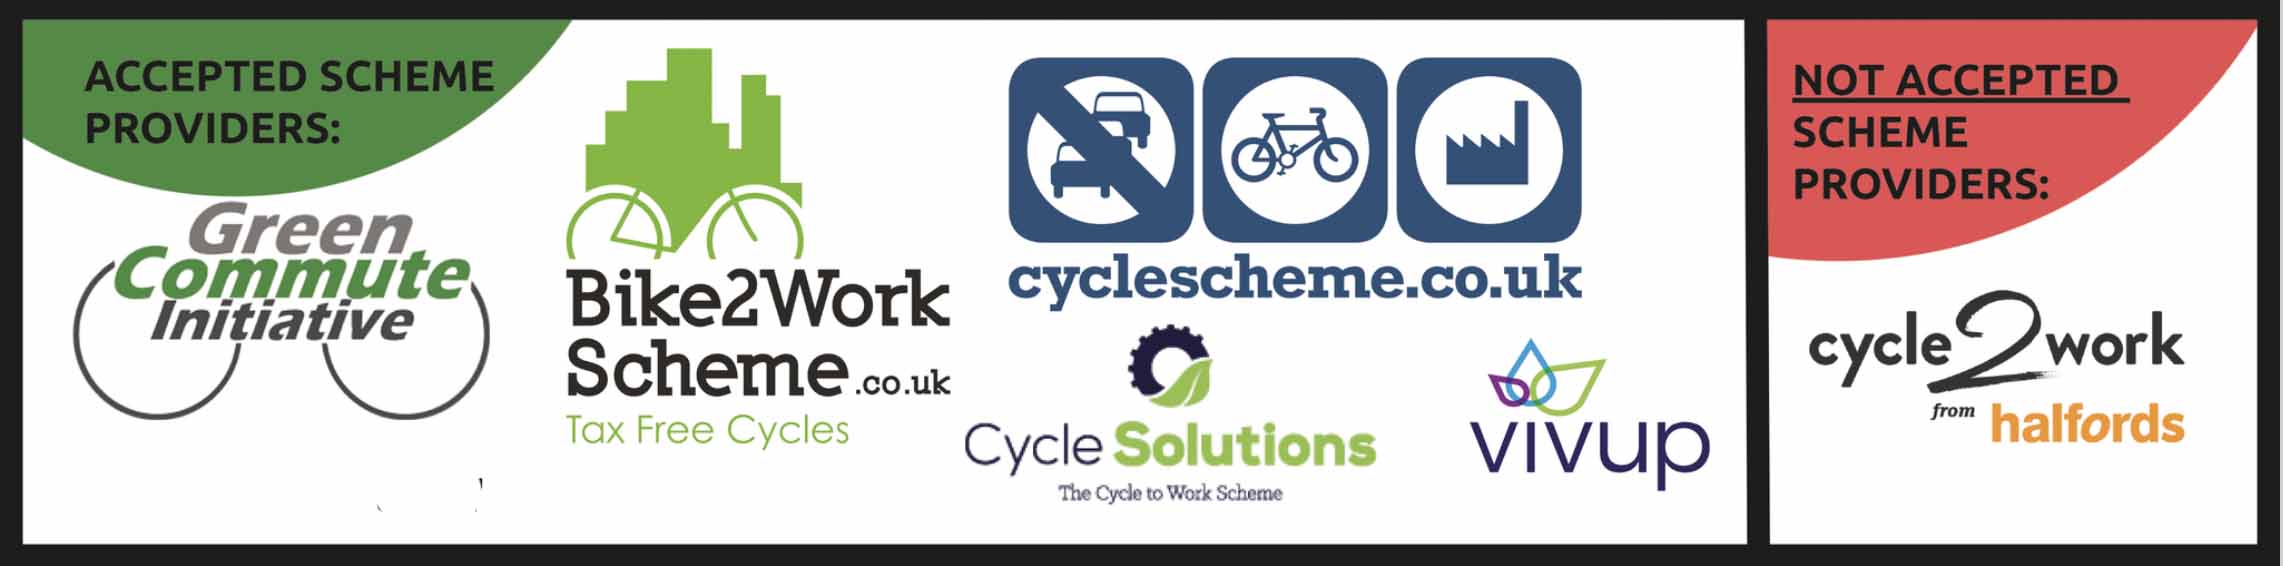 Cycle Schemes We Accept